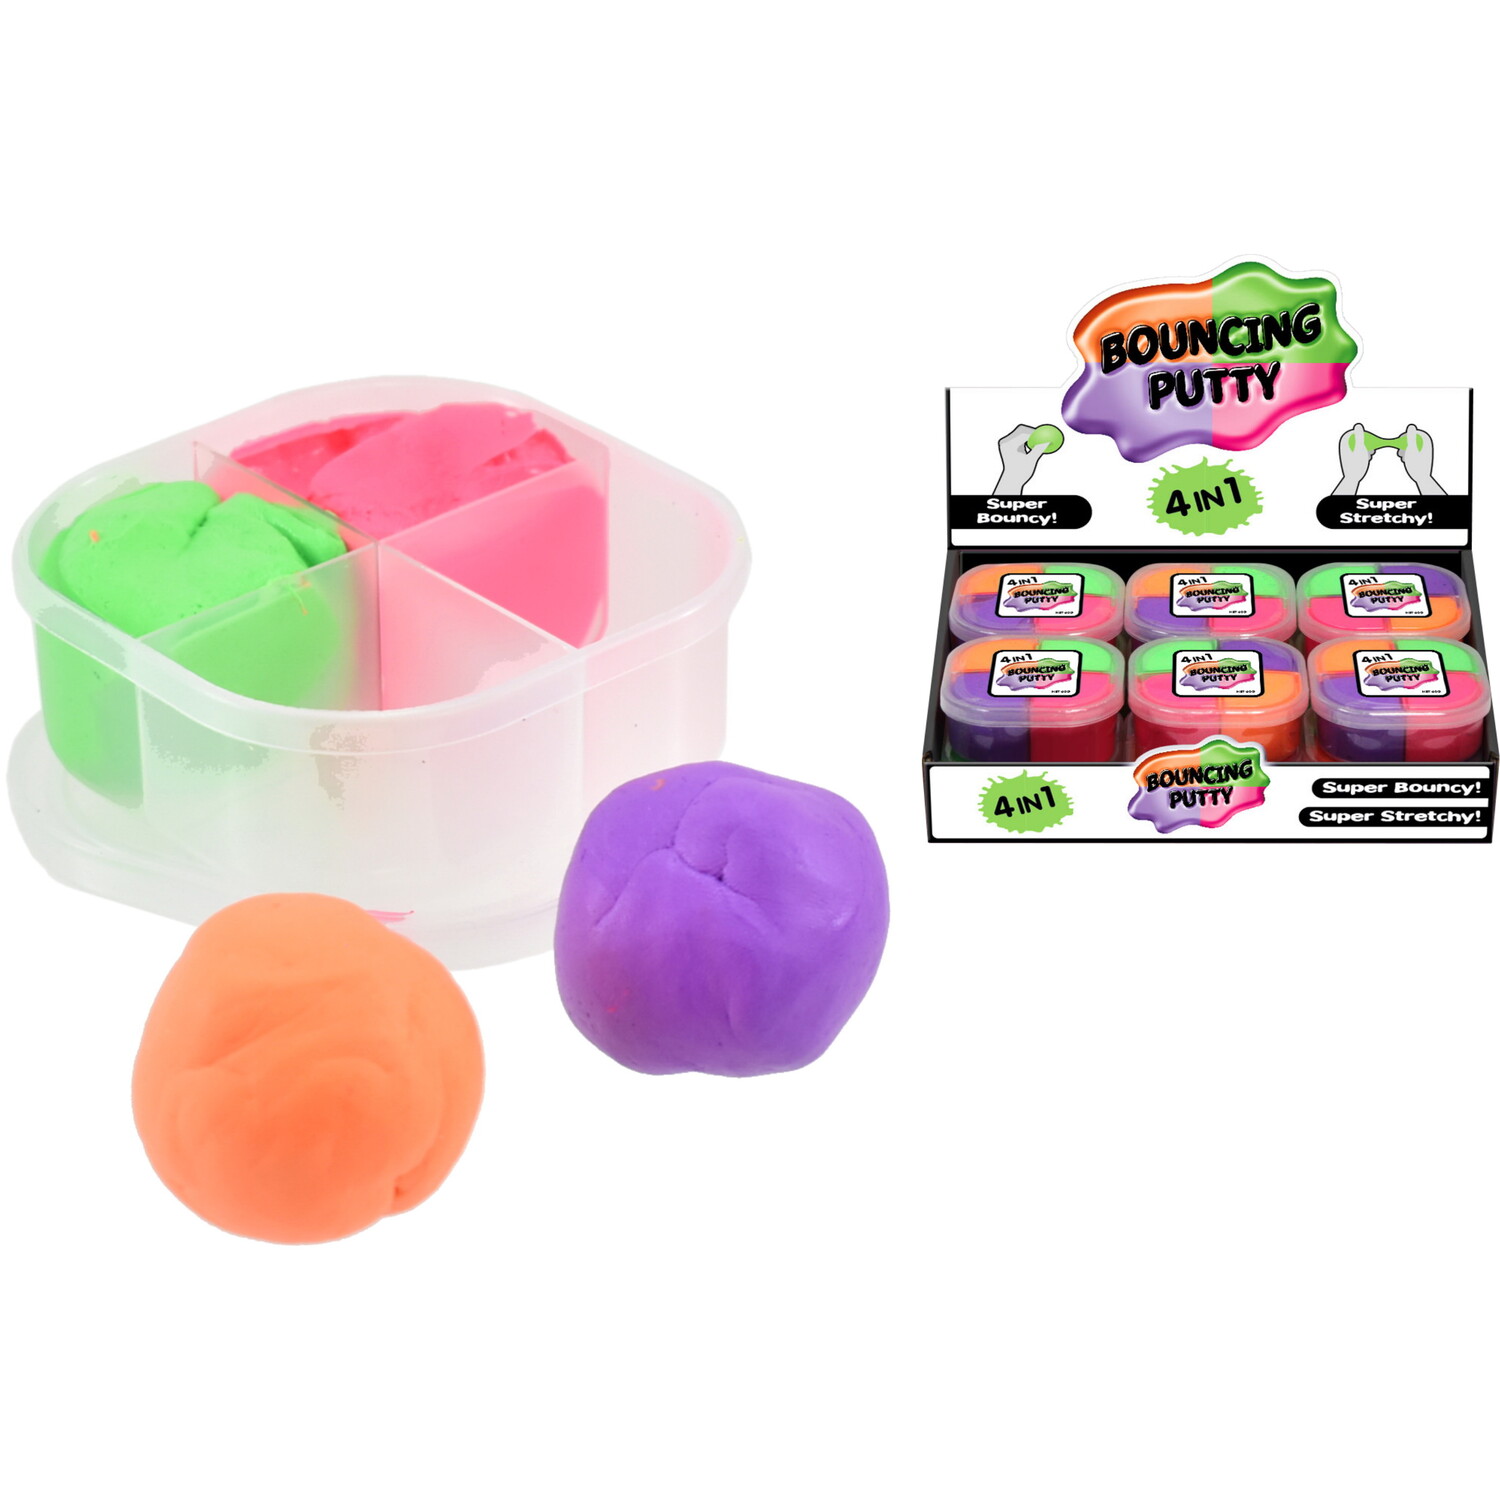 Everyday 4 in 1 Bouncing Putty Toy Image